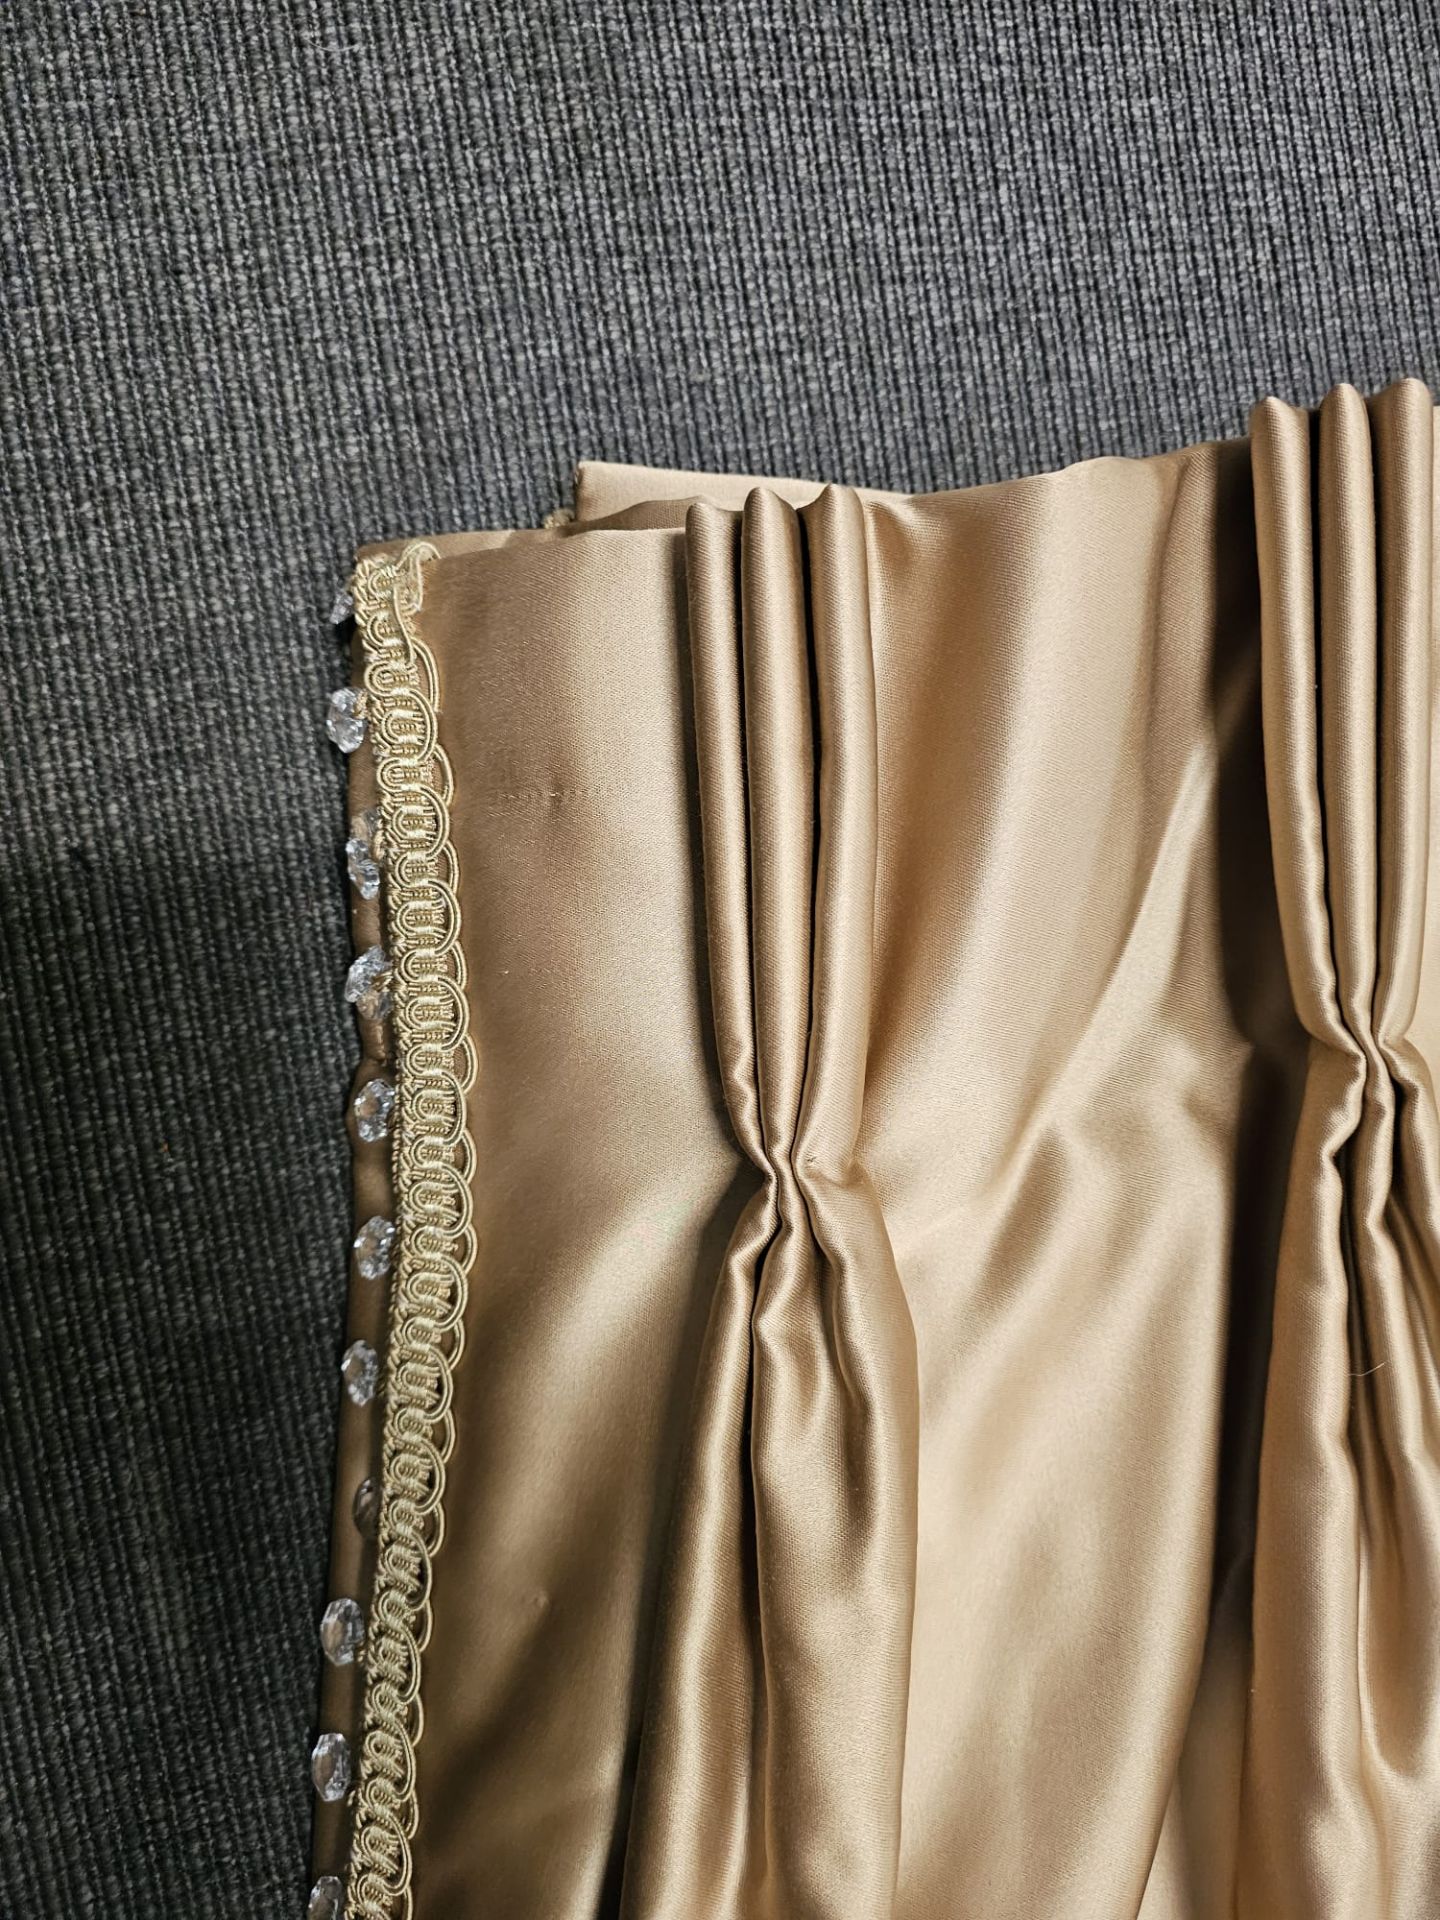 A pair of silk drapes and jabots gold with crystal trim and  embroidered iwith gold silver pattern - Image 3 of 3